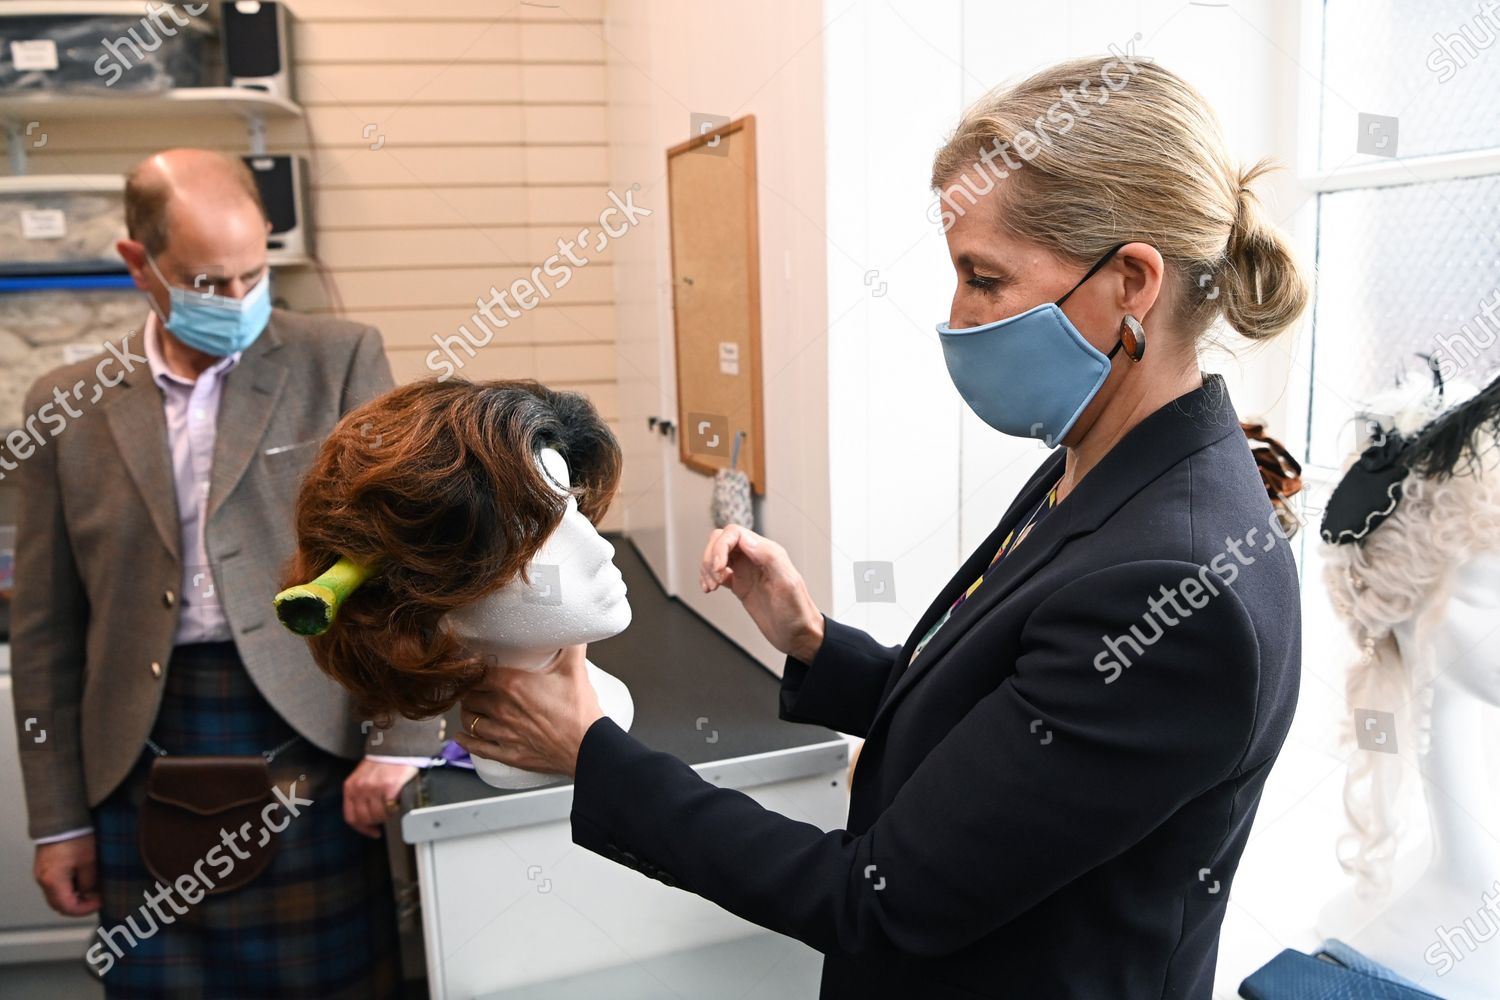 CASA REAL BRITÁNICA - Página 75 Prince-edward-and-sophie-countess-of-wessex-visit-to-utopia-costumes-forfar-scotland-uk-shutterstock-editorial-12172309n